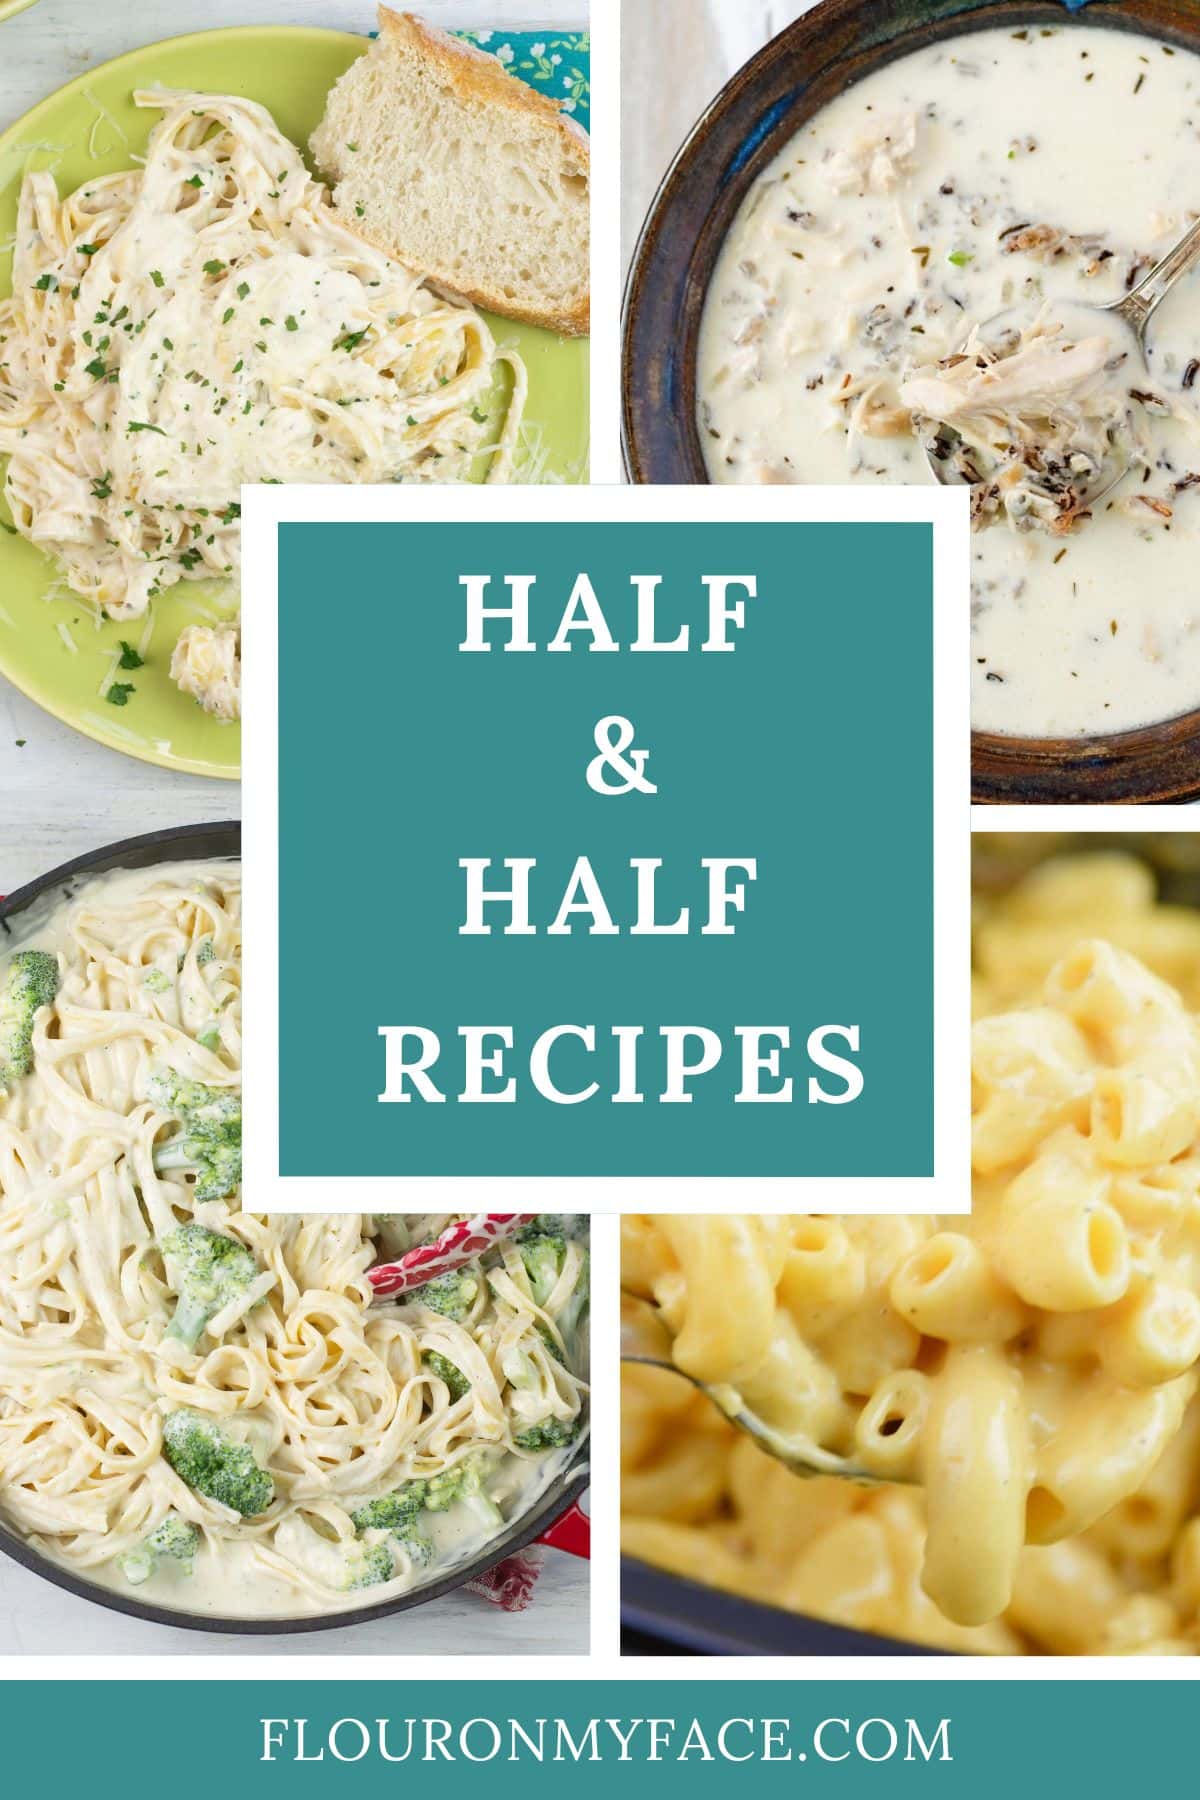 Large image with 4 previews of recipes made using half and half instead of cream.